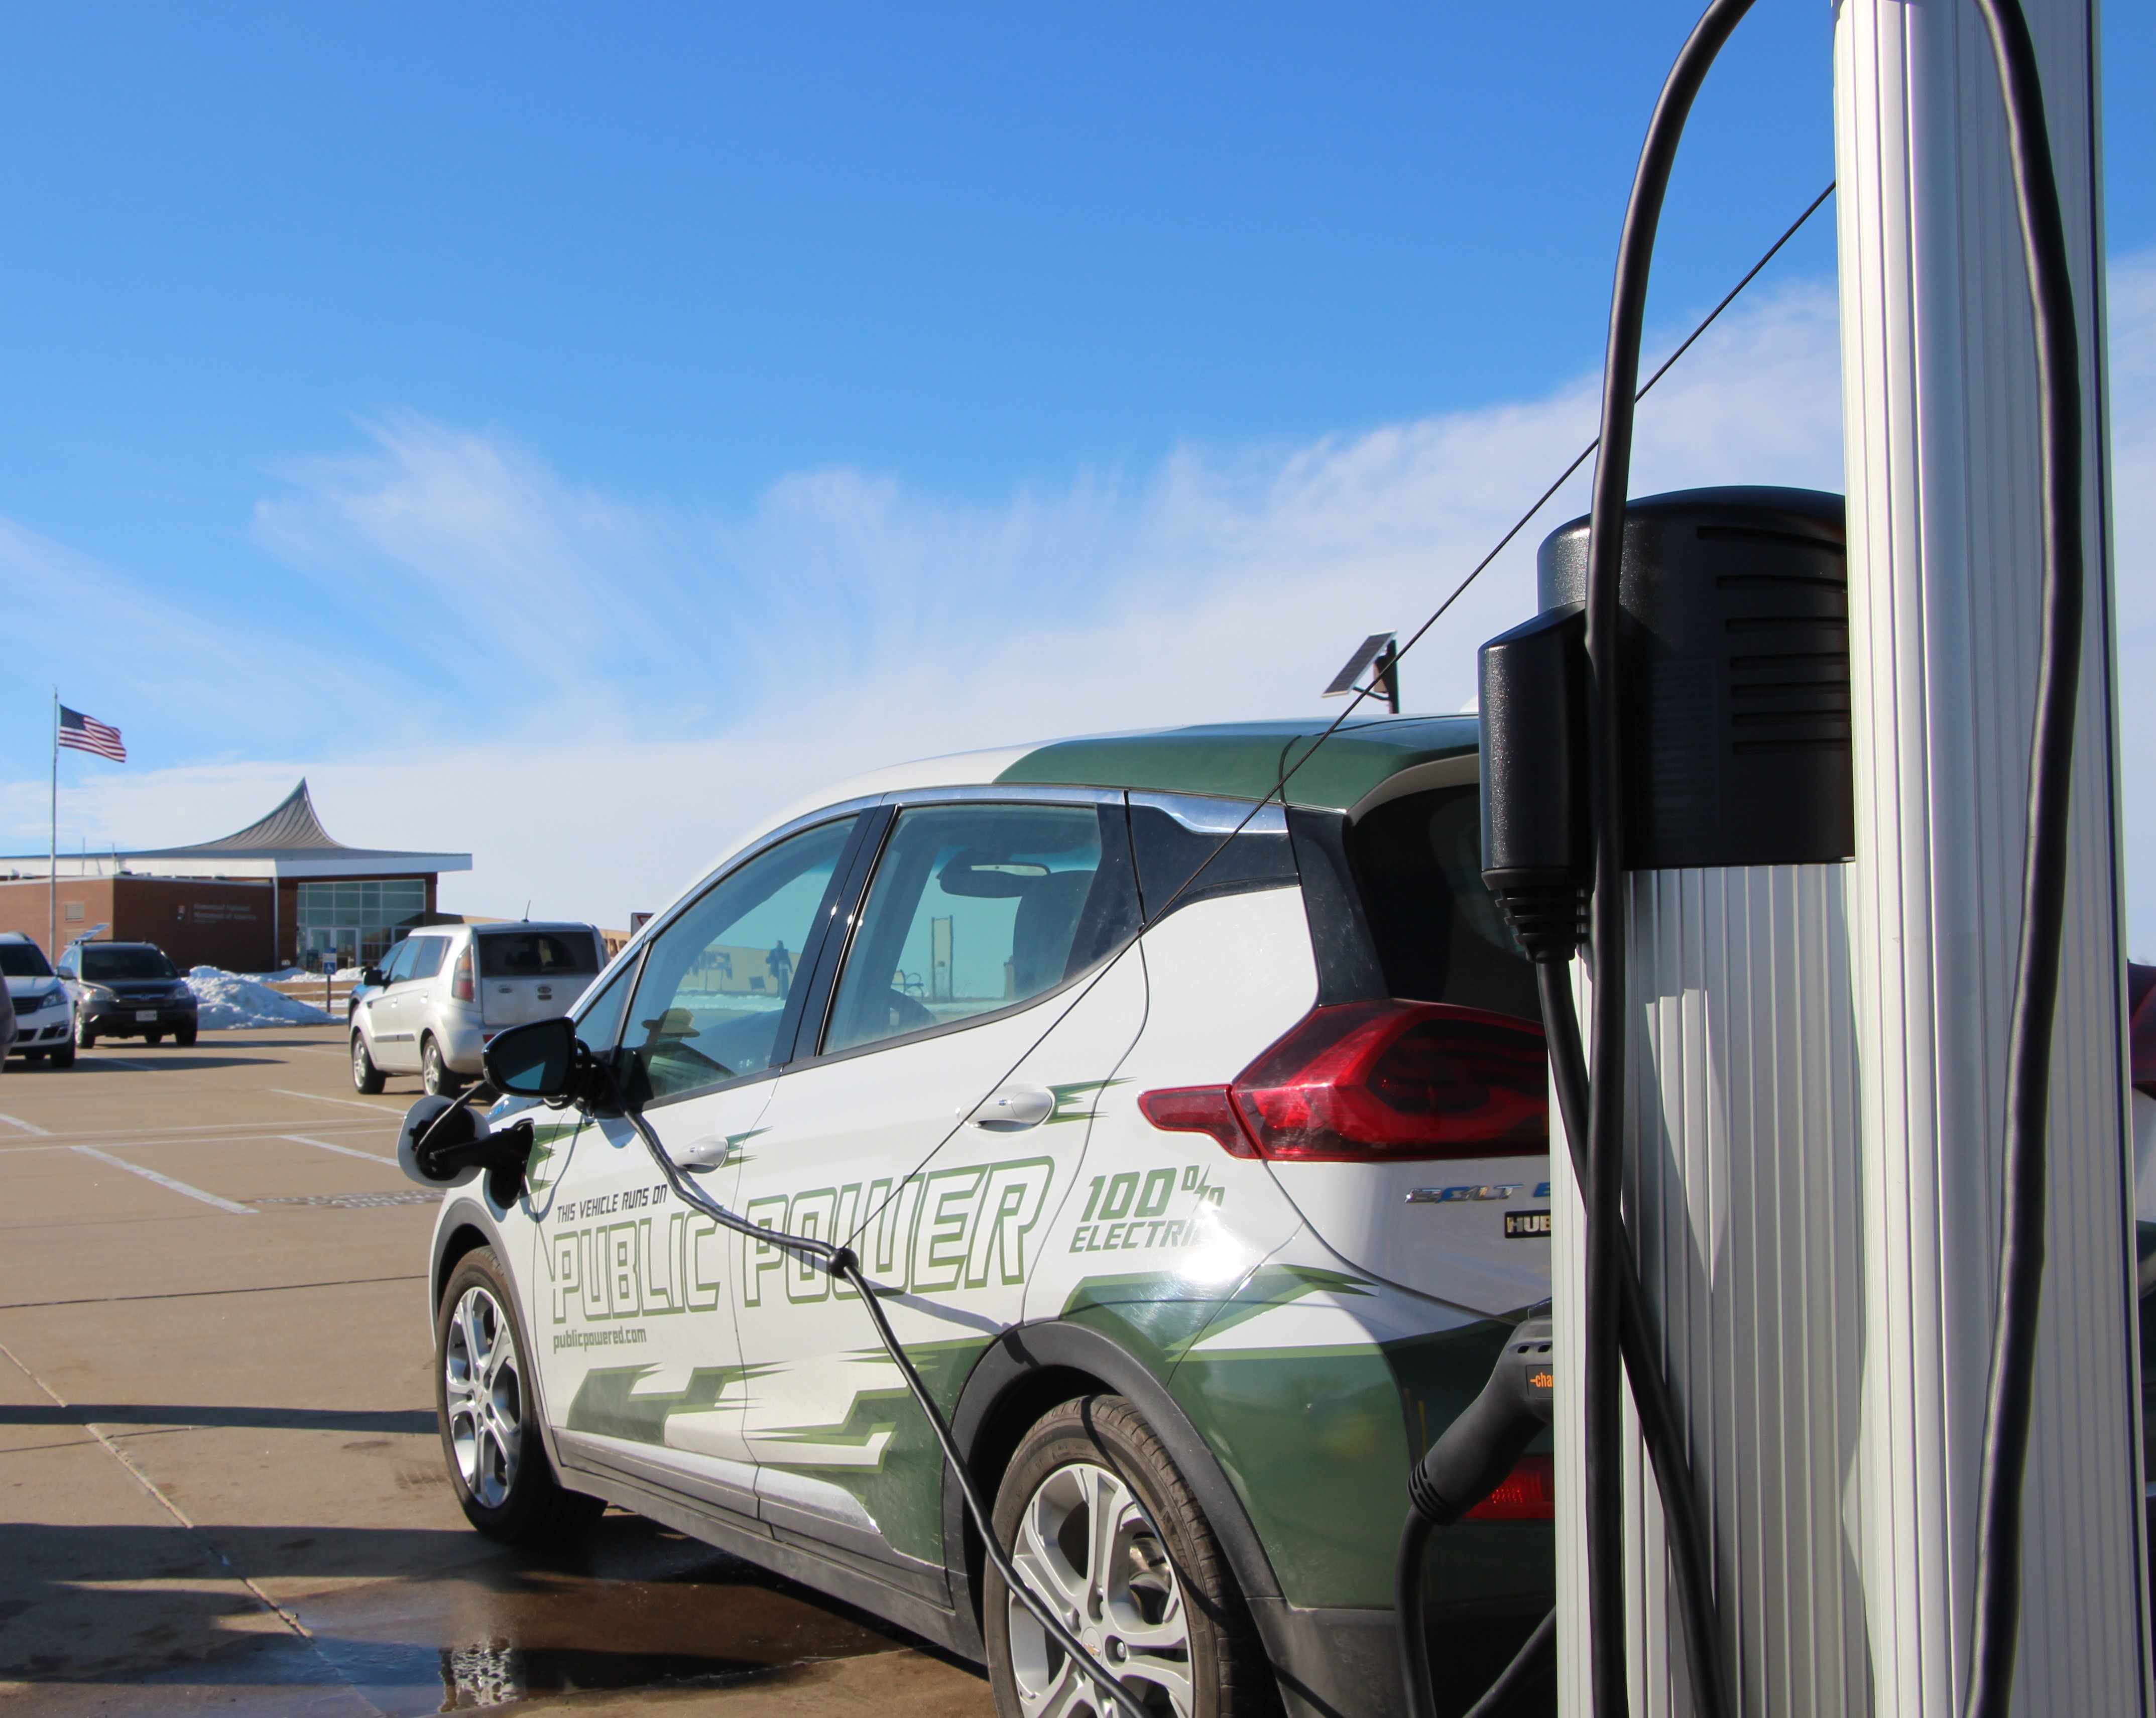 Partners Bring the Power (as in EV Charging) to Homestead National